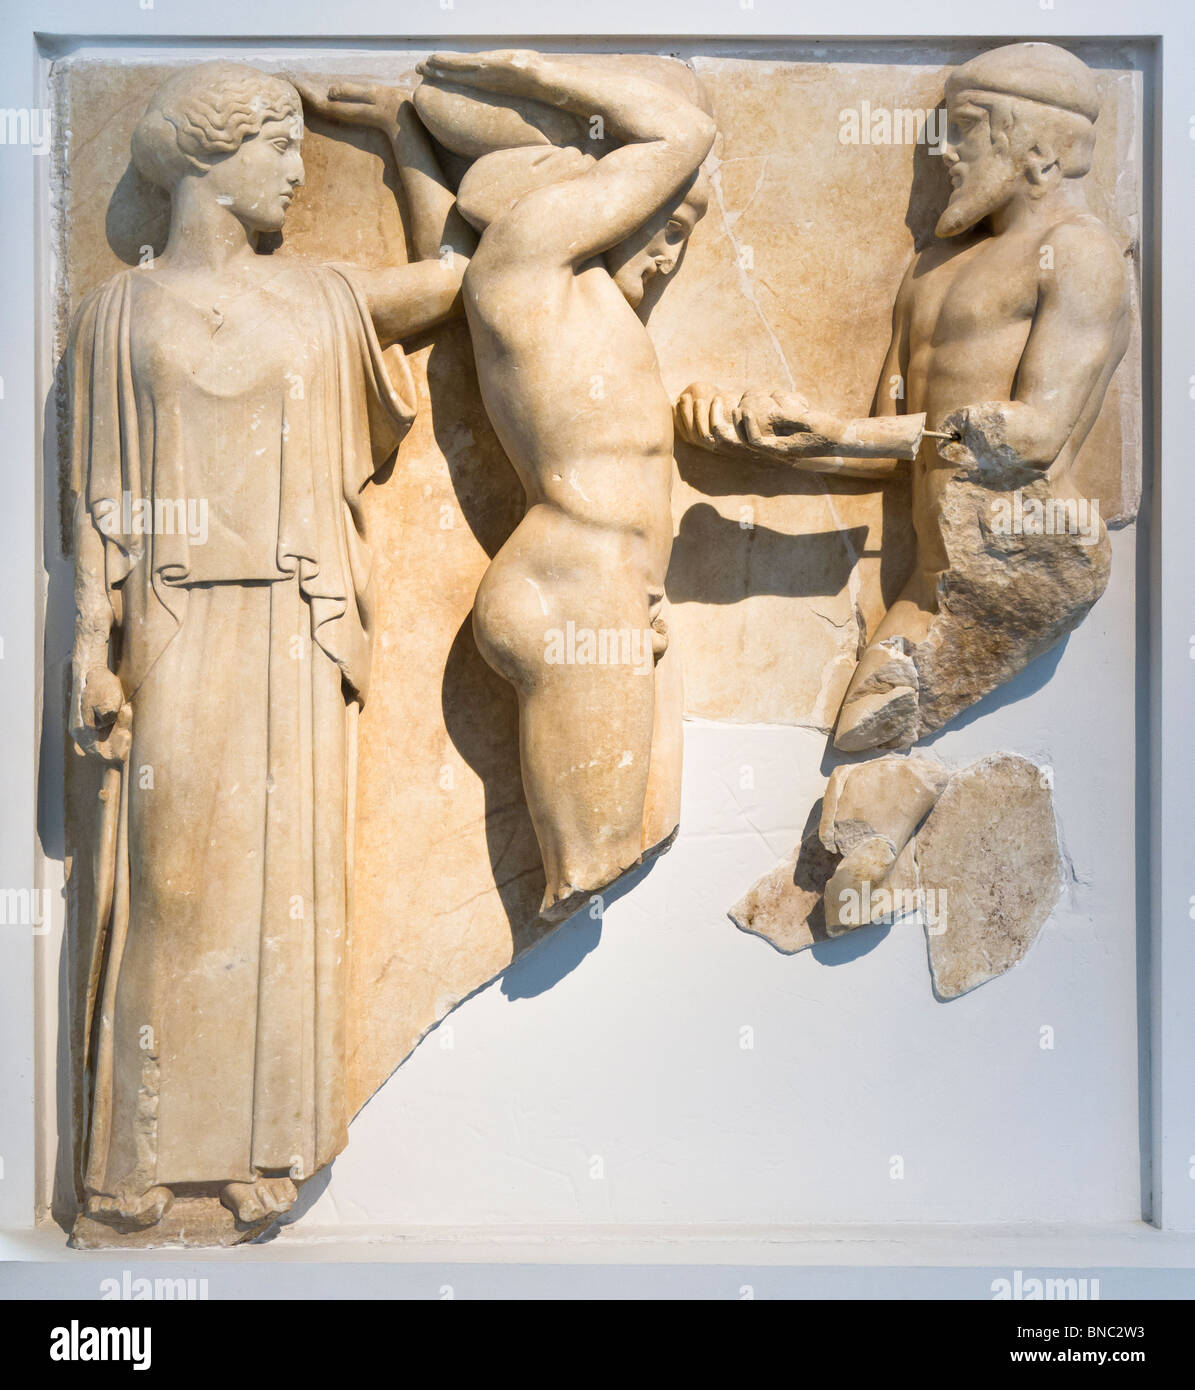 Metope 10 of the Temple of Zeus at Olympia: Herakles supports the heavens while Atlas brings him the Apples of the Hesperides. Stock Photo